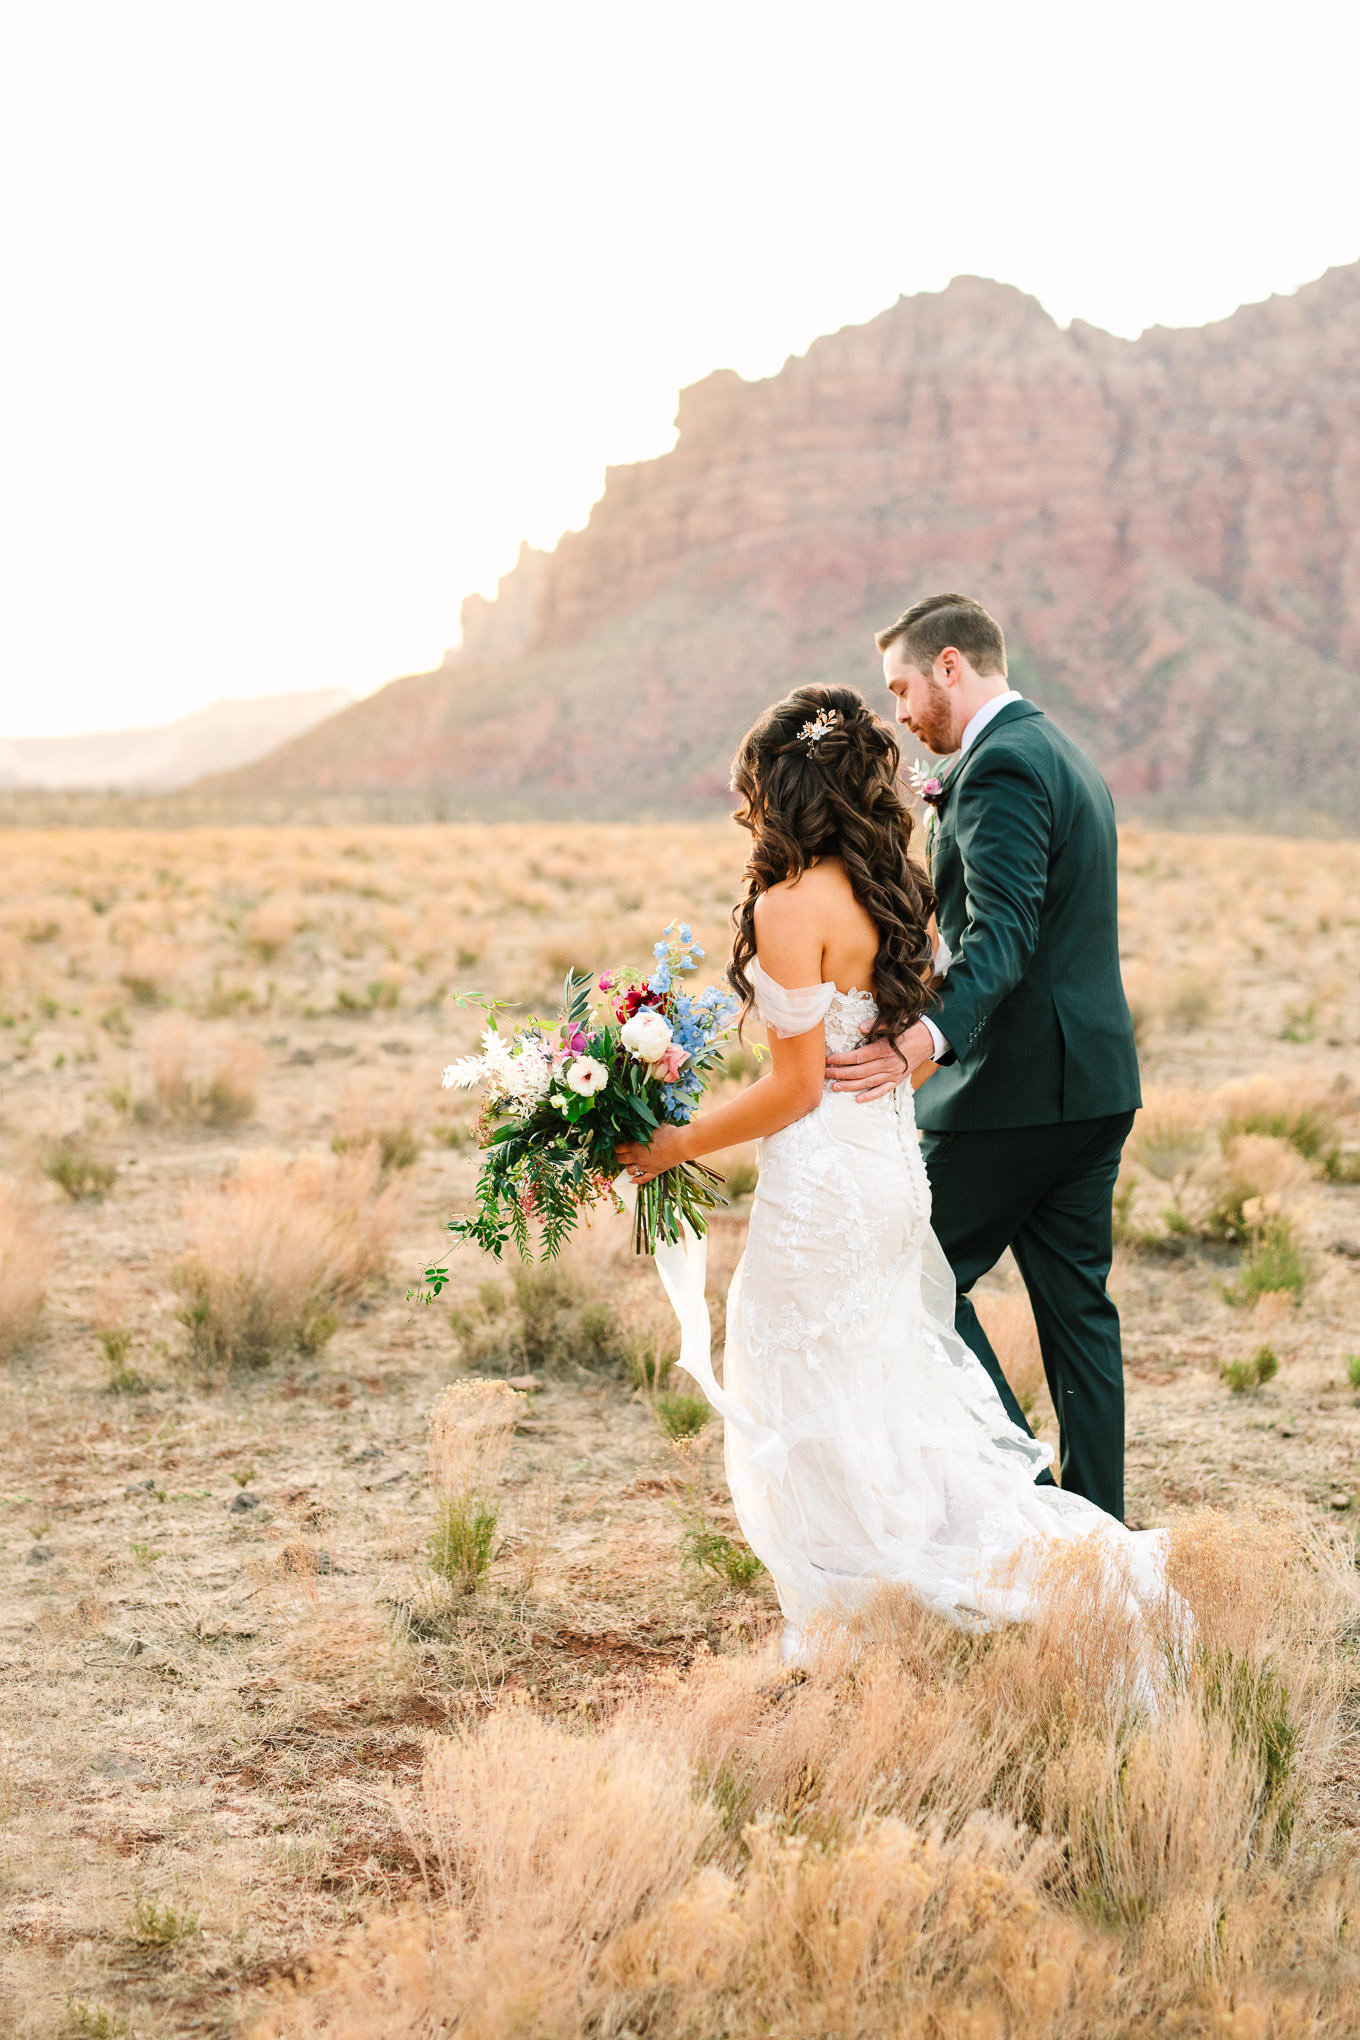 Bride and groom walking to ceremony | Zion Under Canvas camping elopement at sunrise | Colorful elopement photography | #utahelopement #zionelopement #zionwedding #undercanvaszion #sunriseelopement #adventureelopement  Source: Mary Costa Photography | Los Angeles